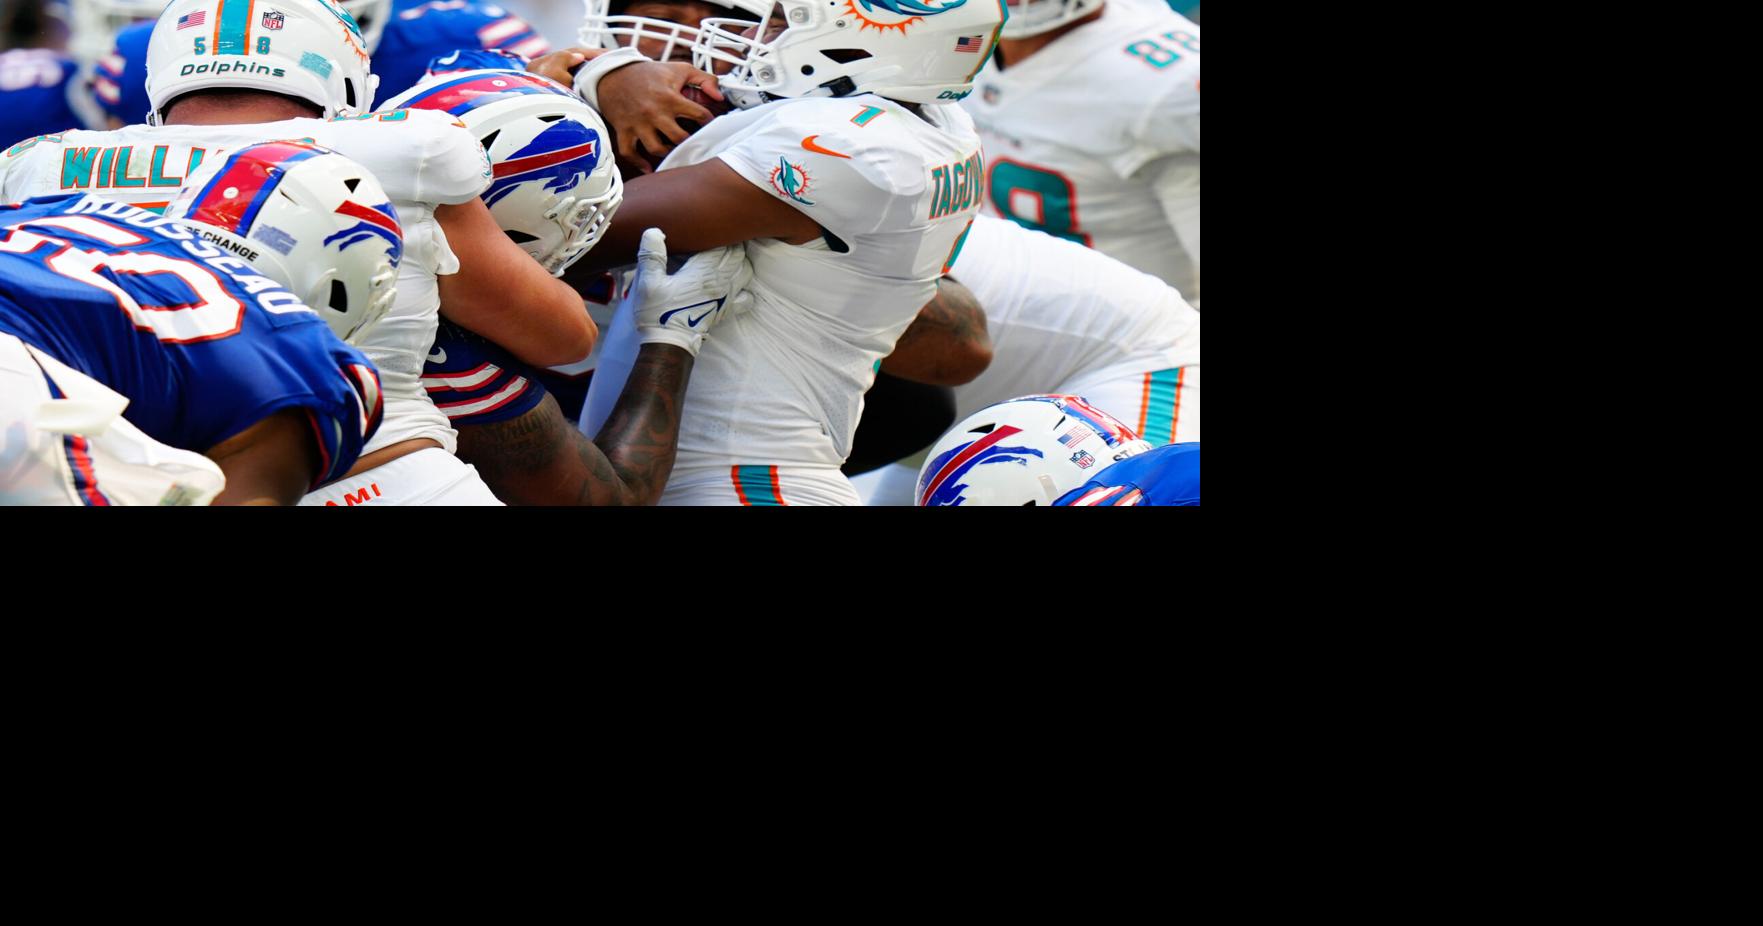 Dolphins stuff Bills, Allen late, hold on for 21-19 win - West